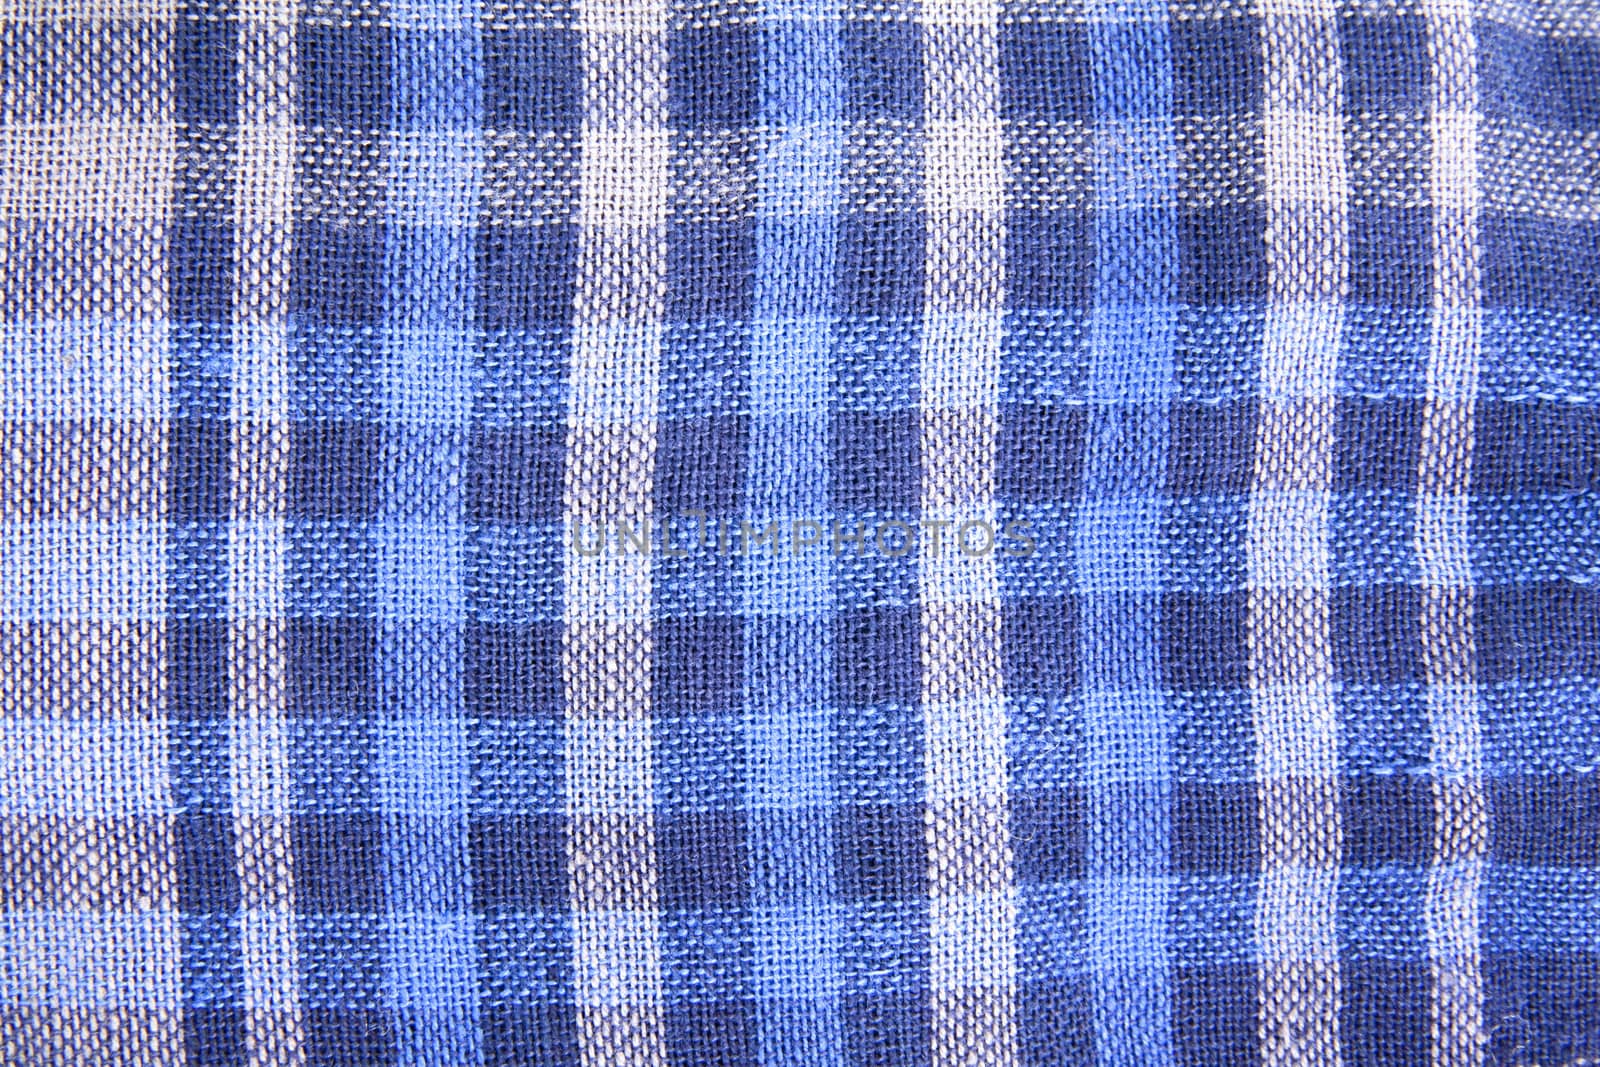 Square pattern on cloth by shutswis